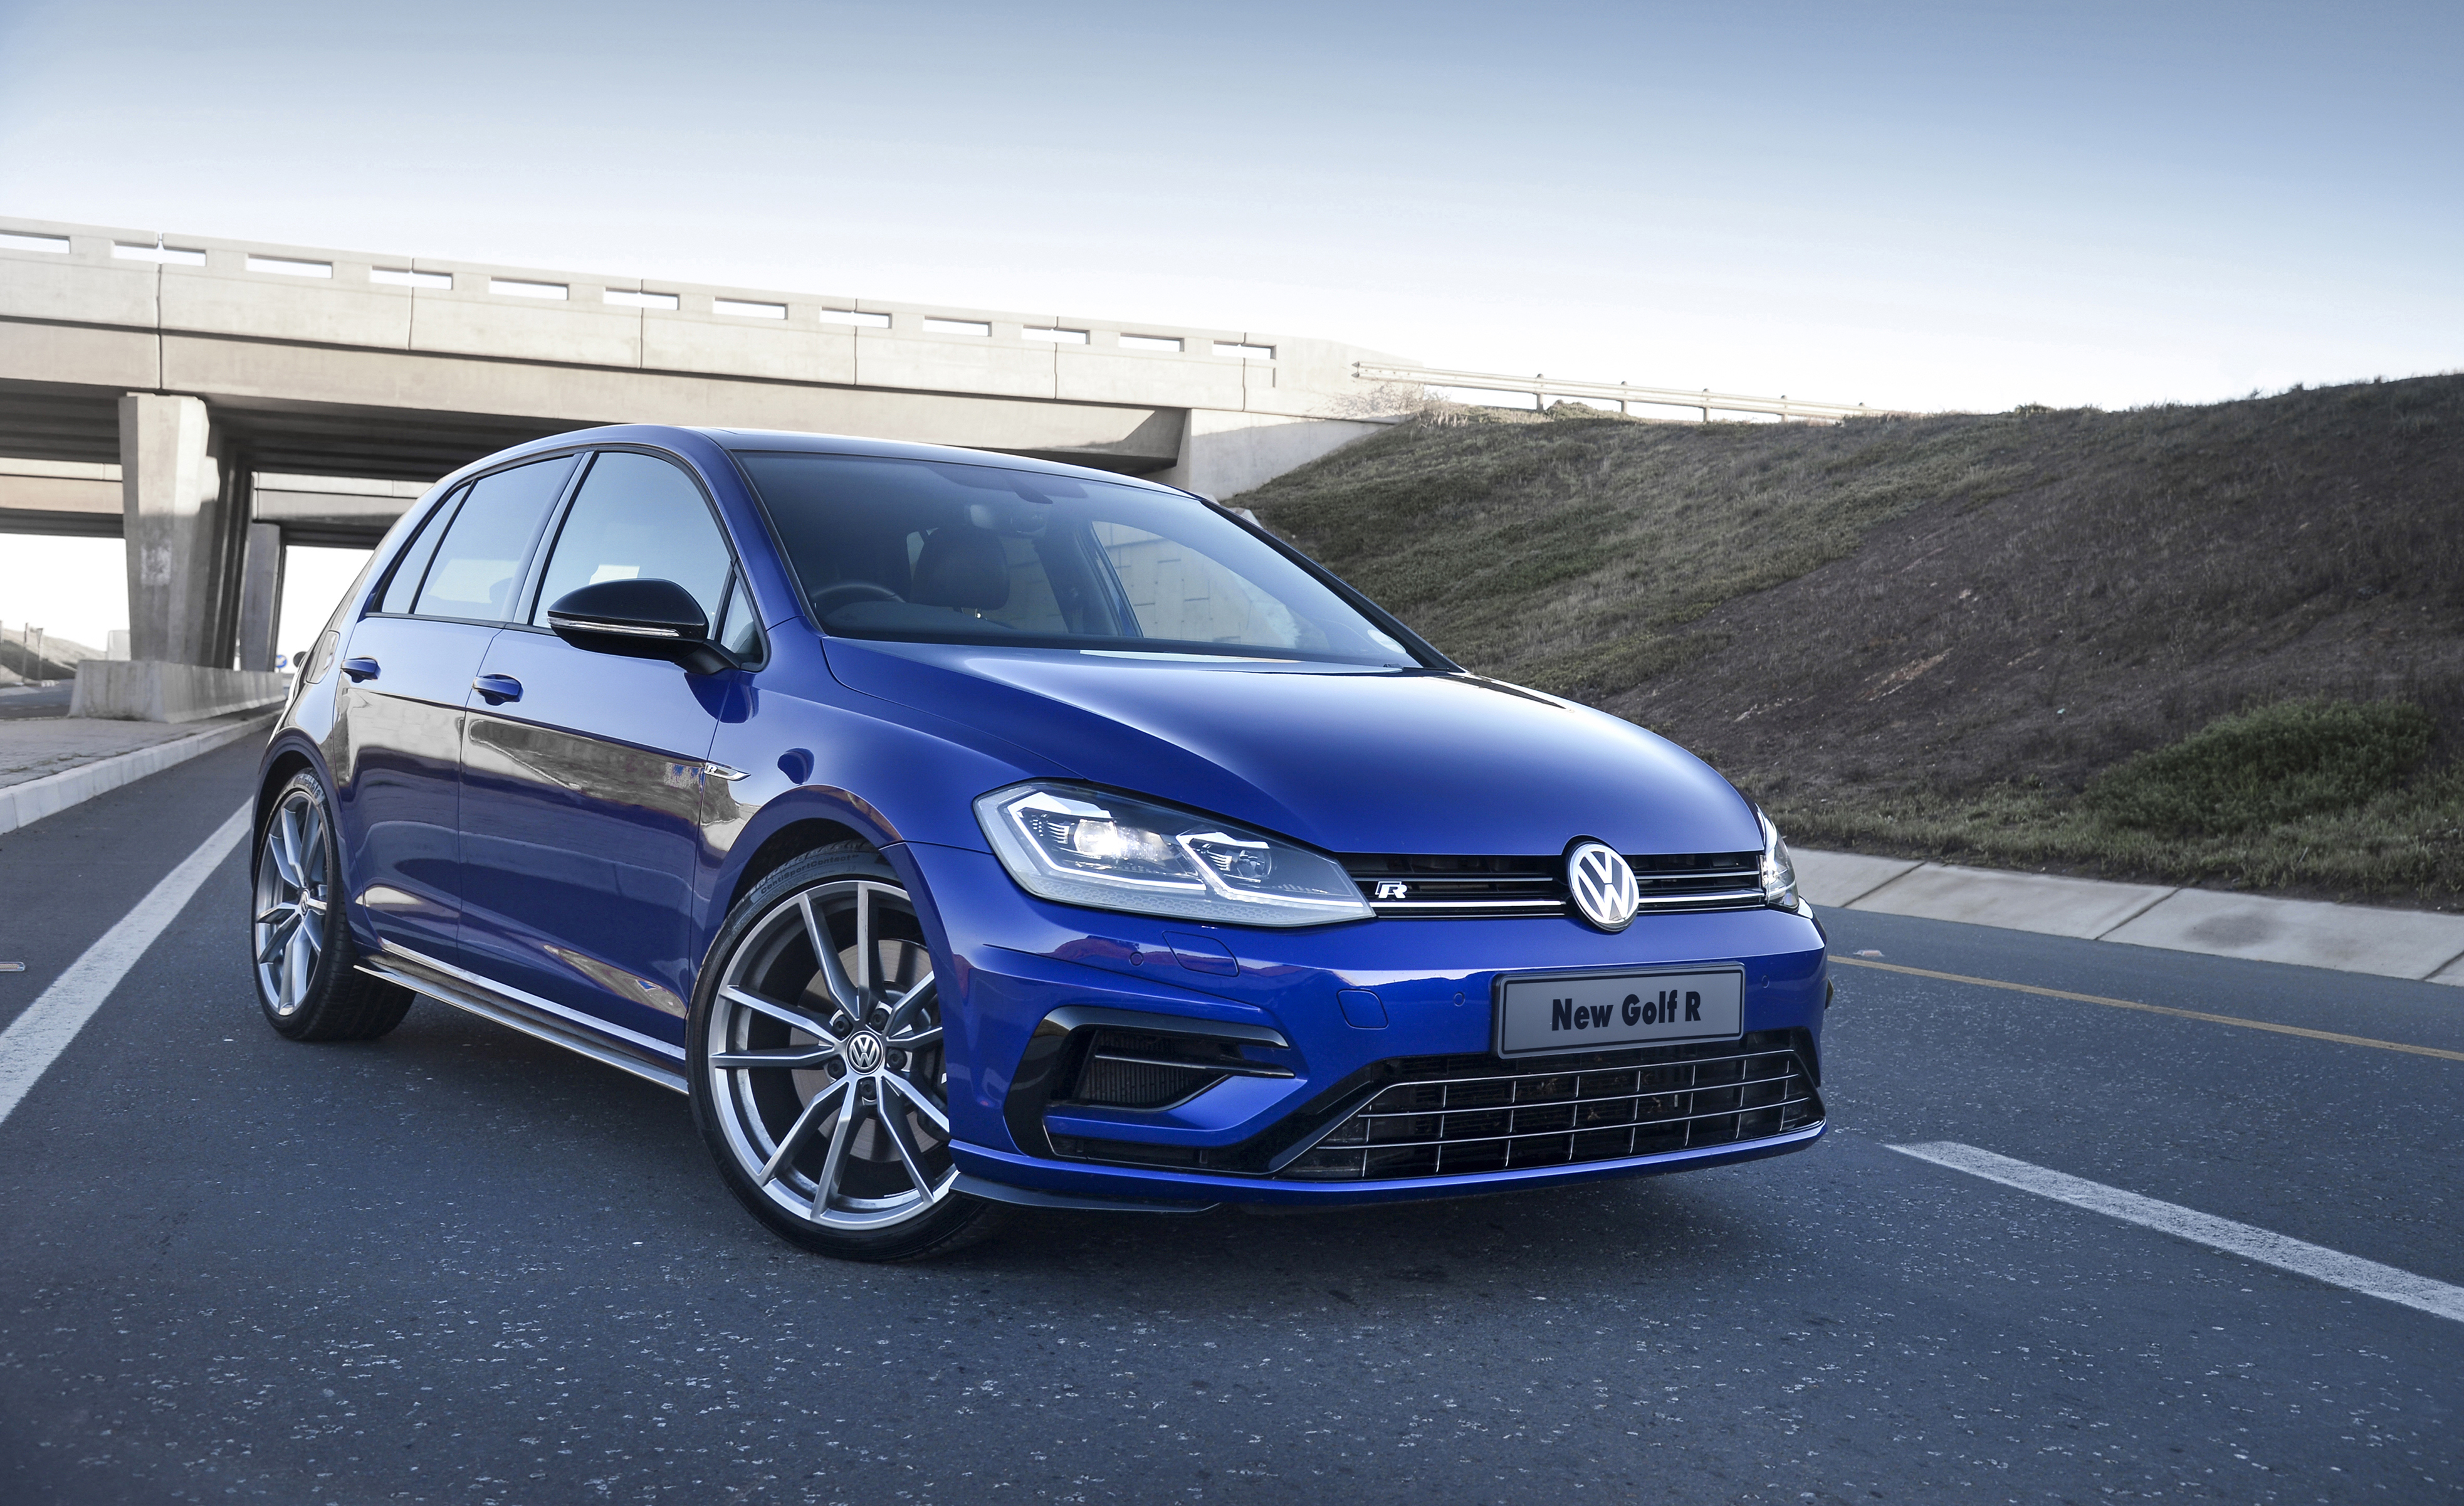 News VW Outs Golf R Performance Pack Upgrades